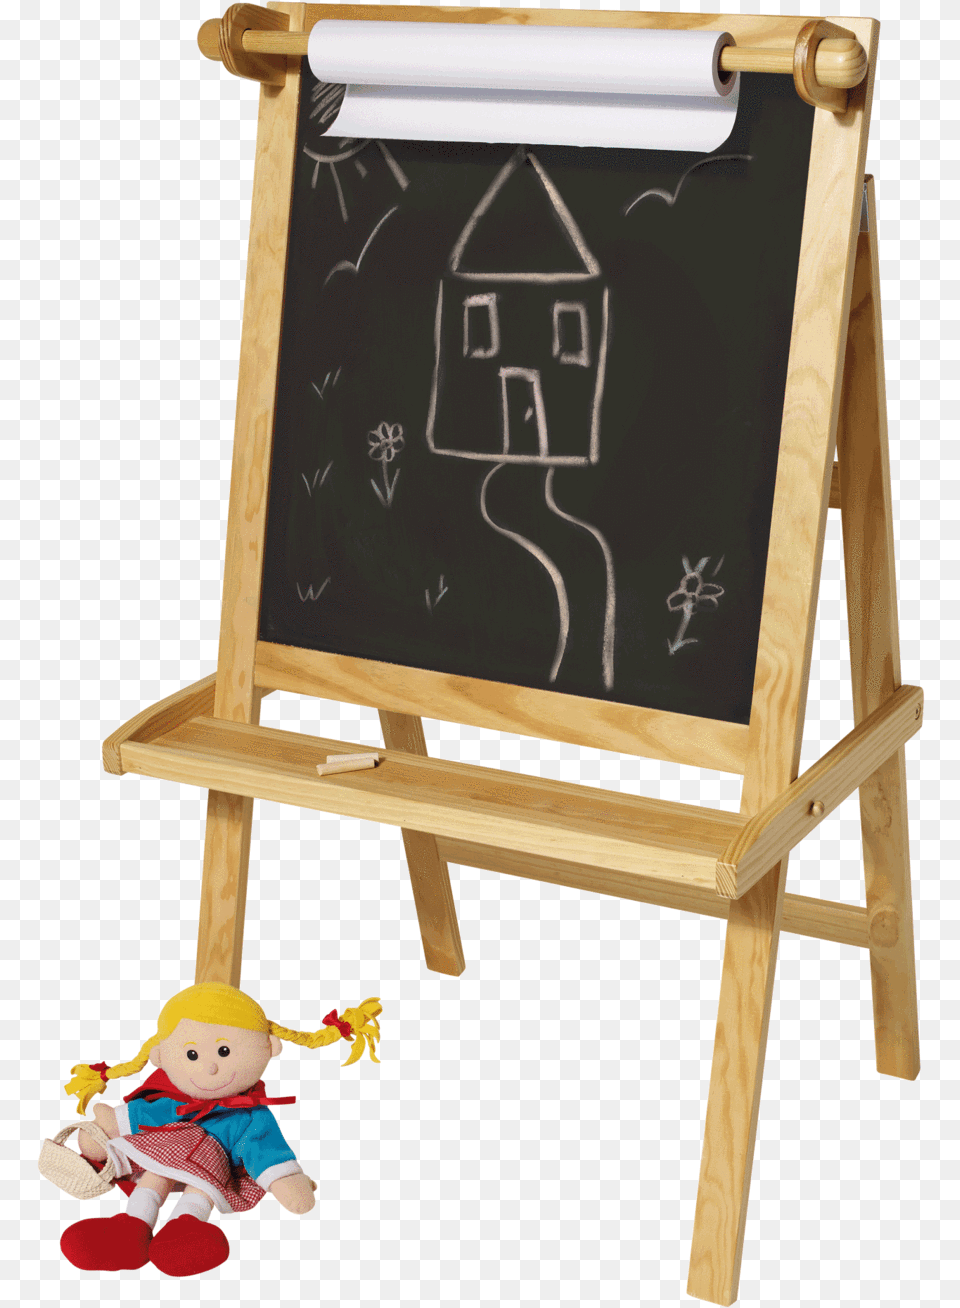 Gltc Art Easel Natural Great Little Trading Co Art Easel Natural, Blackboard, Baby, Person Png Image